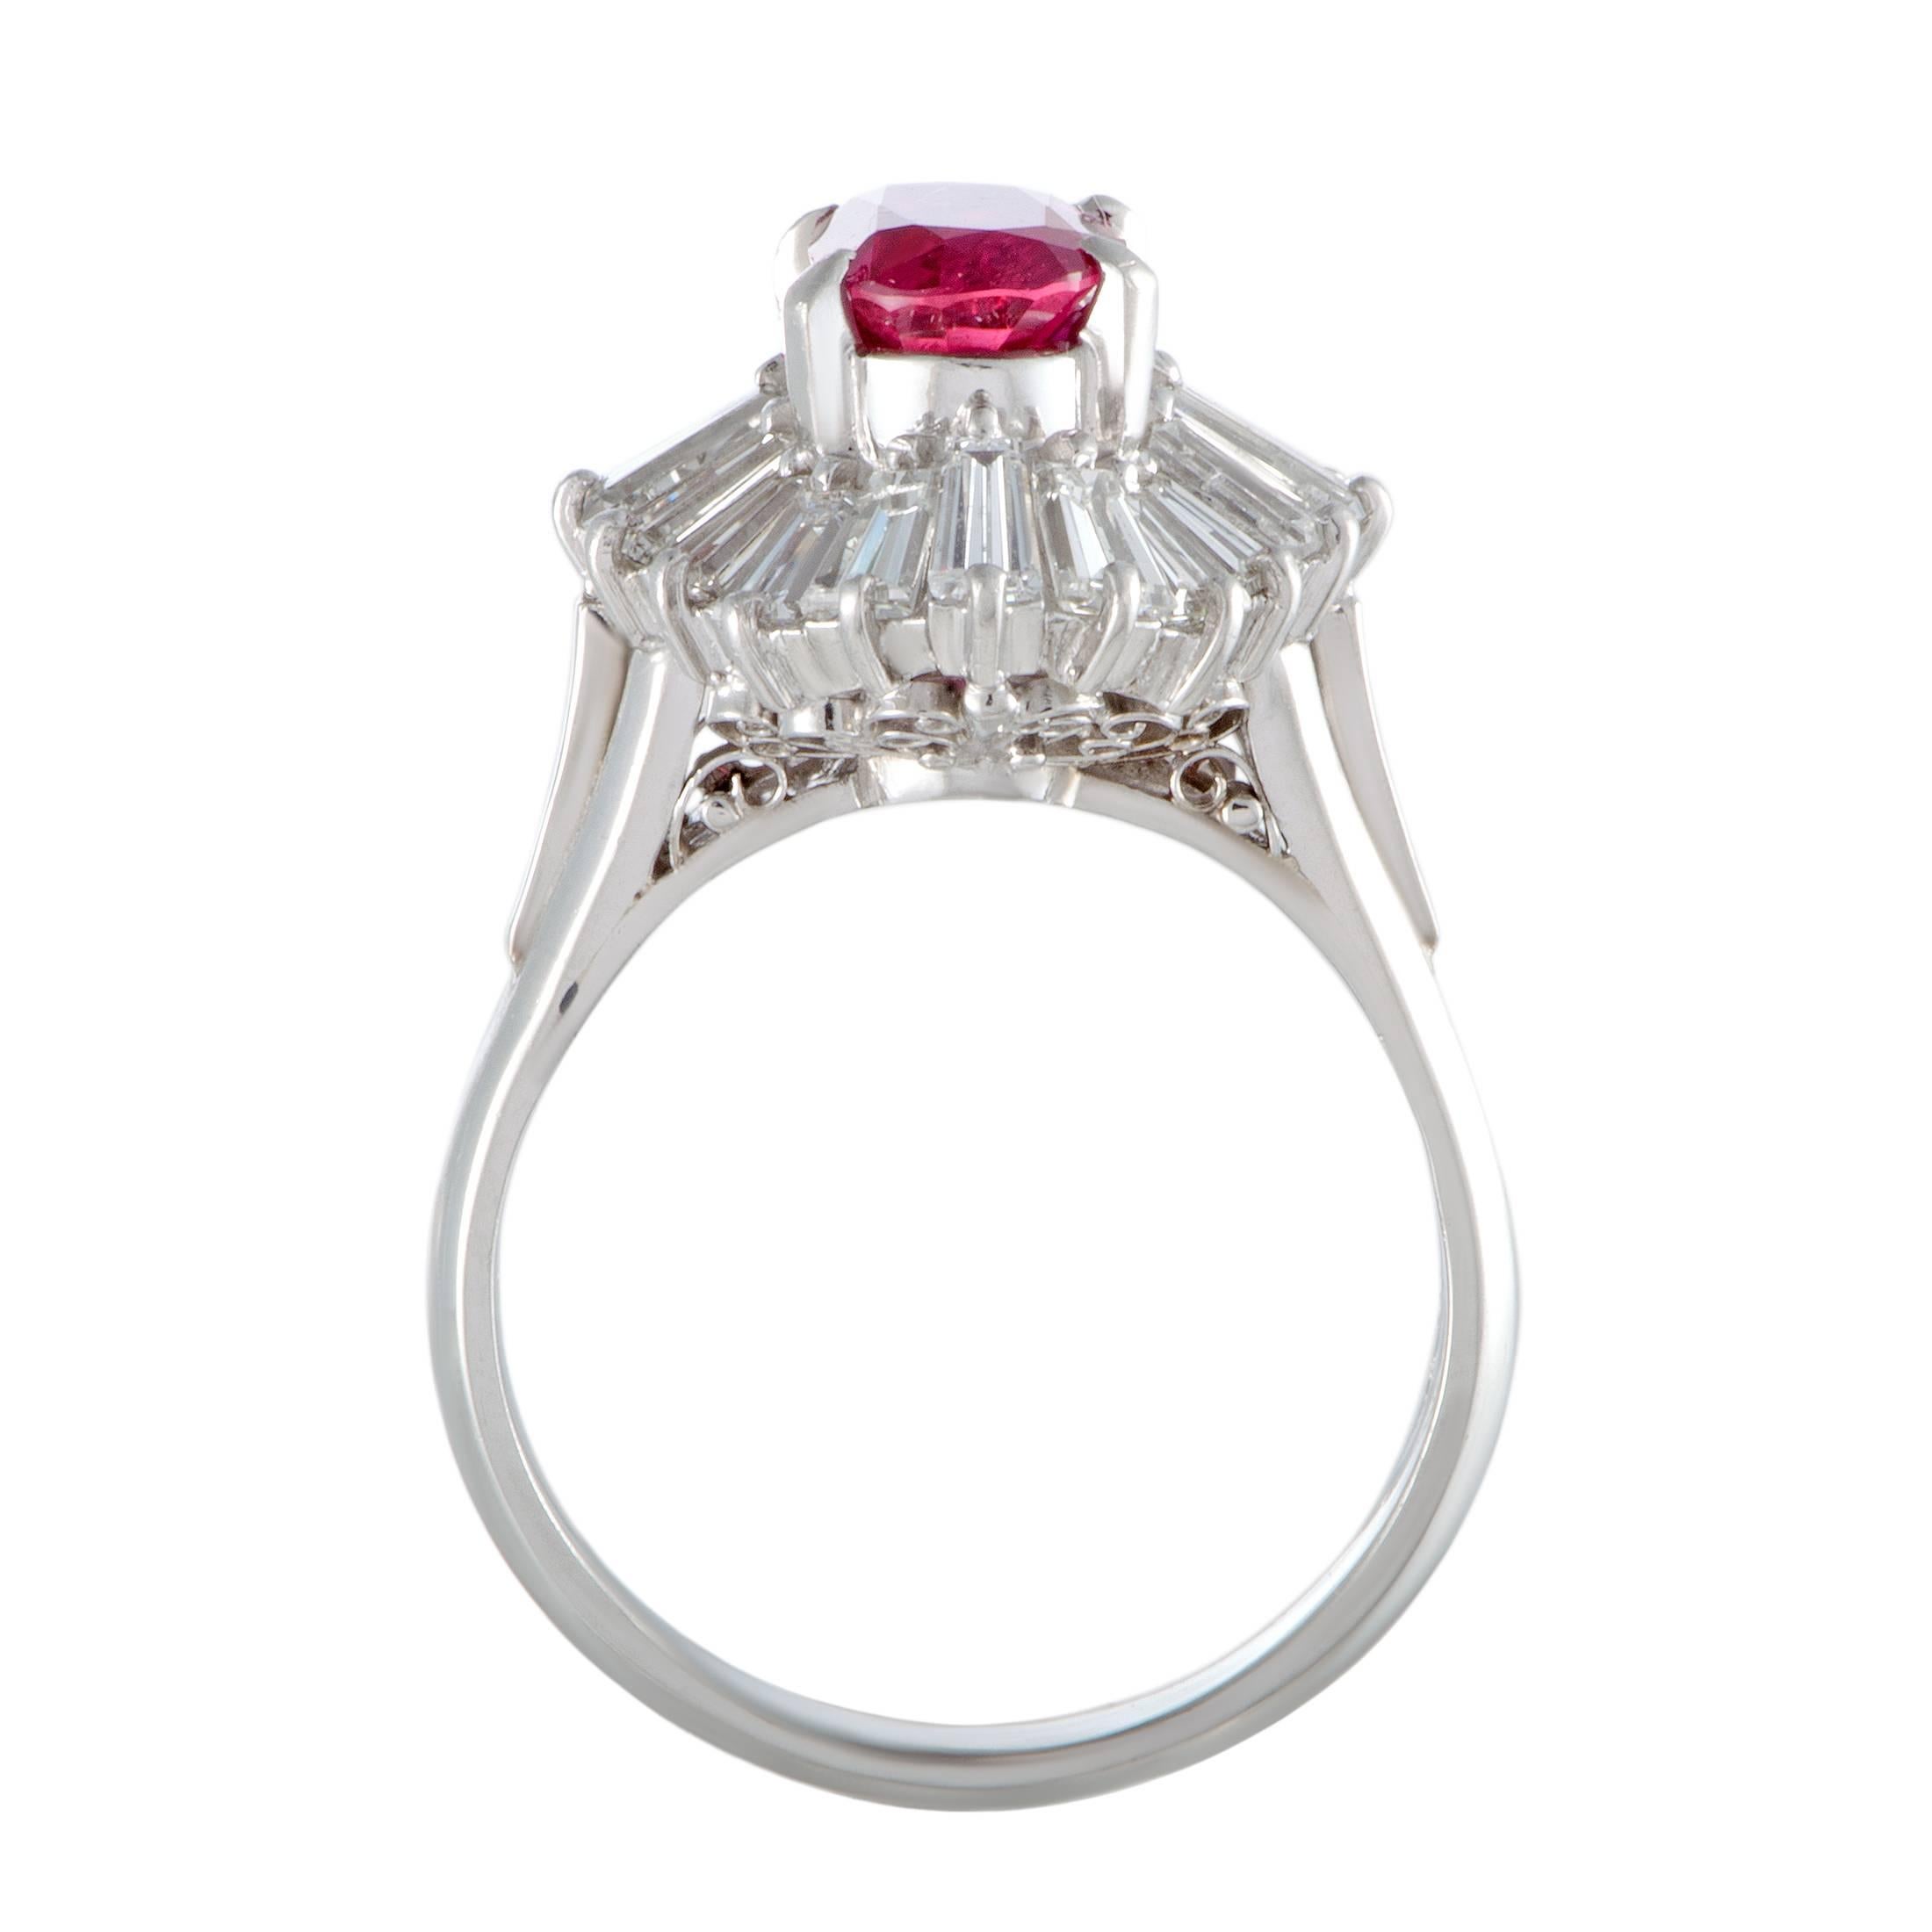 A majestic ruby is beautifully set amidst a plethora of scintillating diamonds in this spellbinding ring that is masterfully crafted from stylish platinum. The ruby weighs 1.88 carats and the diamonds amount to 1.87 carats.
Ring Top Dimensions: 17mm